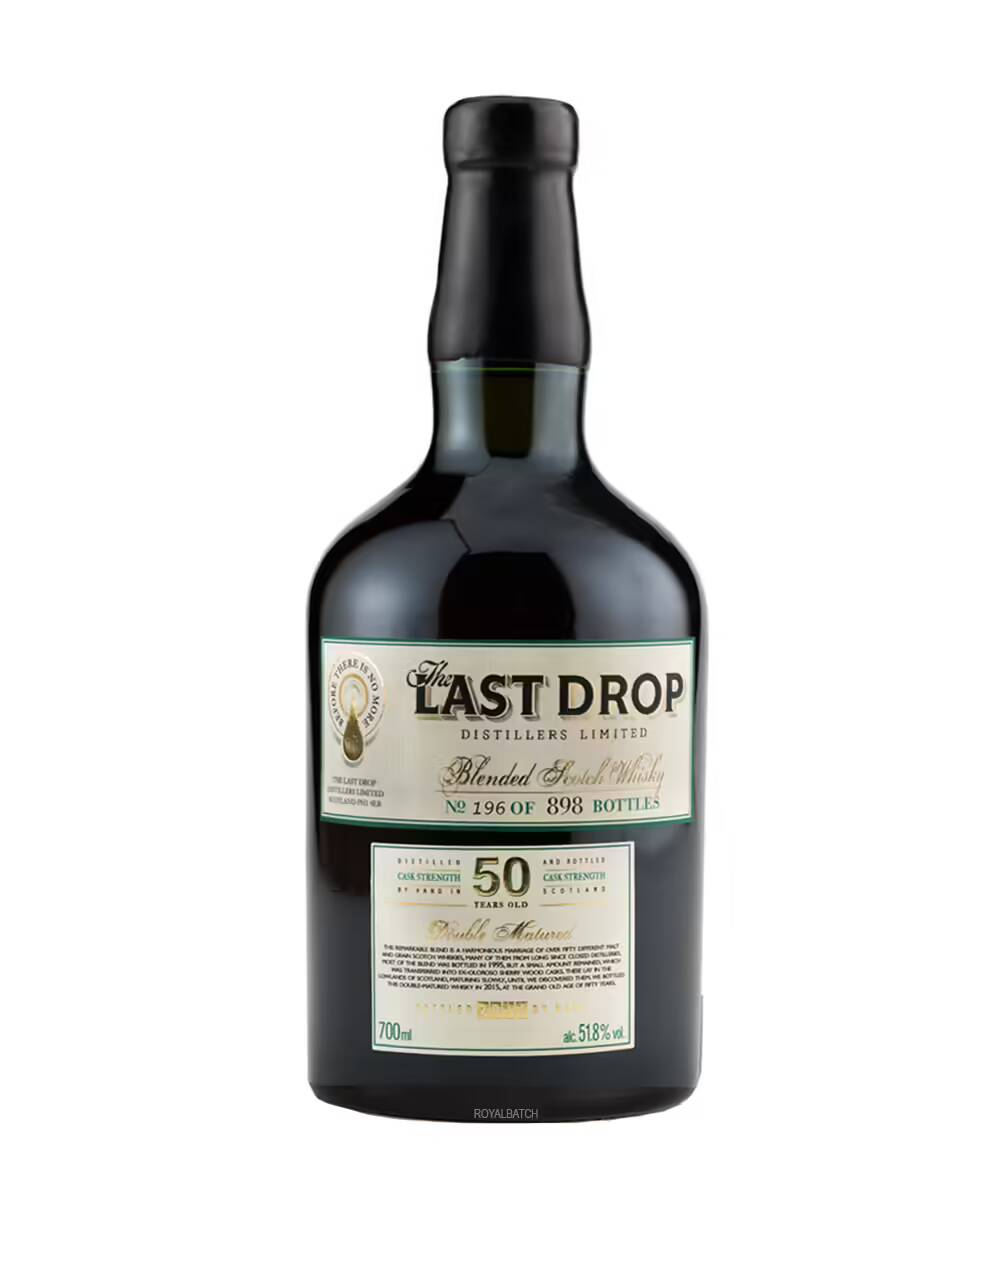 The Last Drop Double Matured 50 Year Old Scotch Whisky